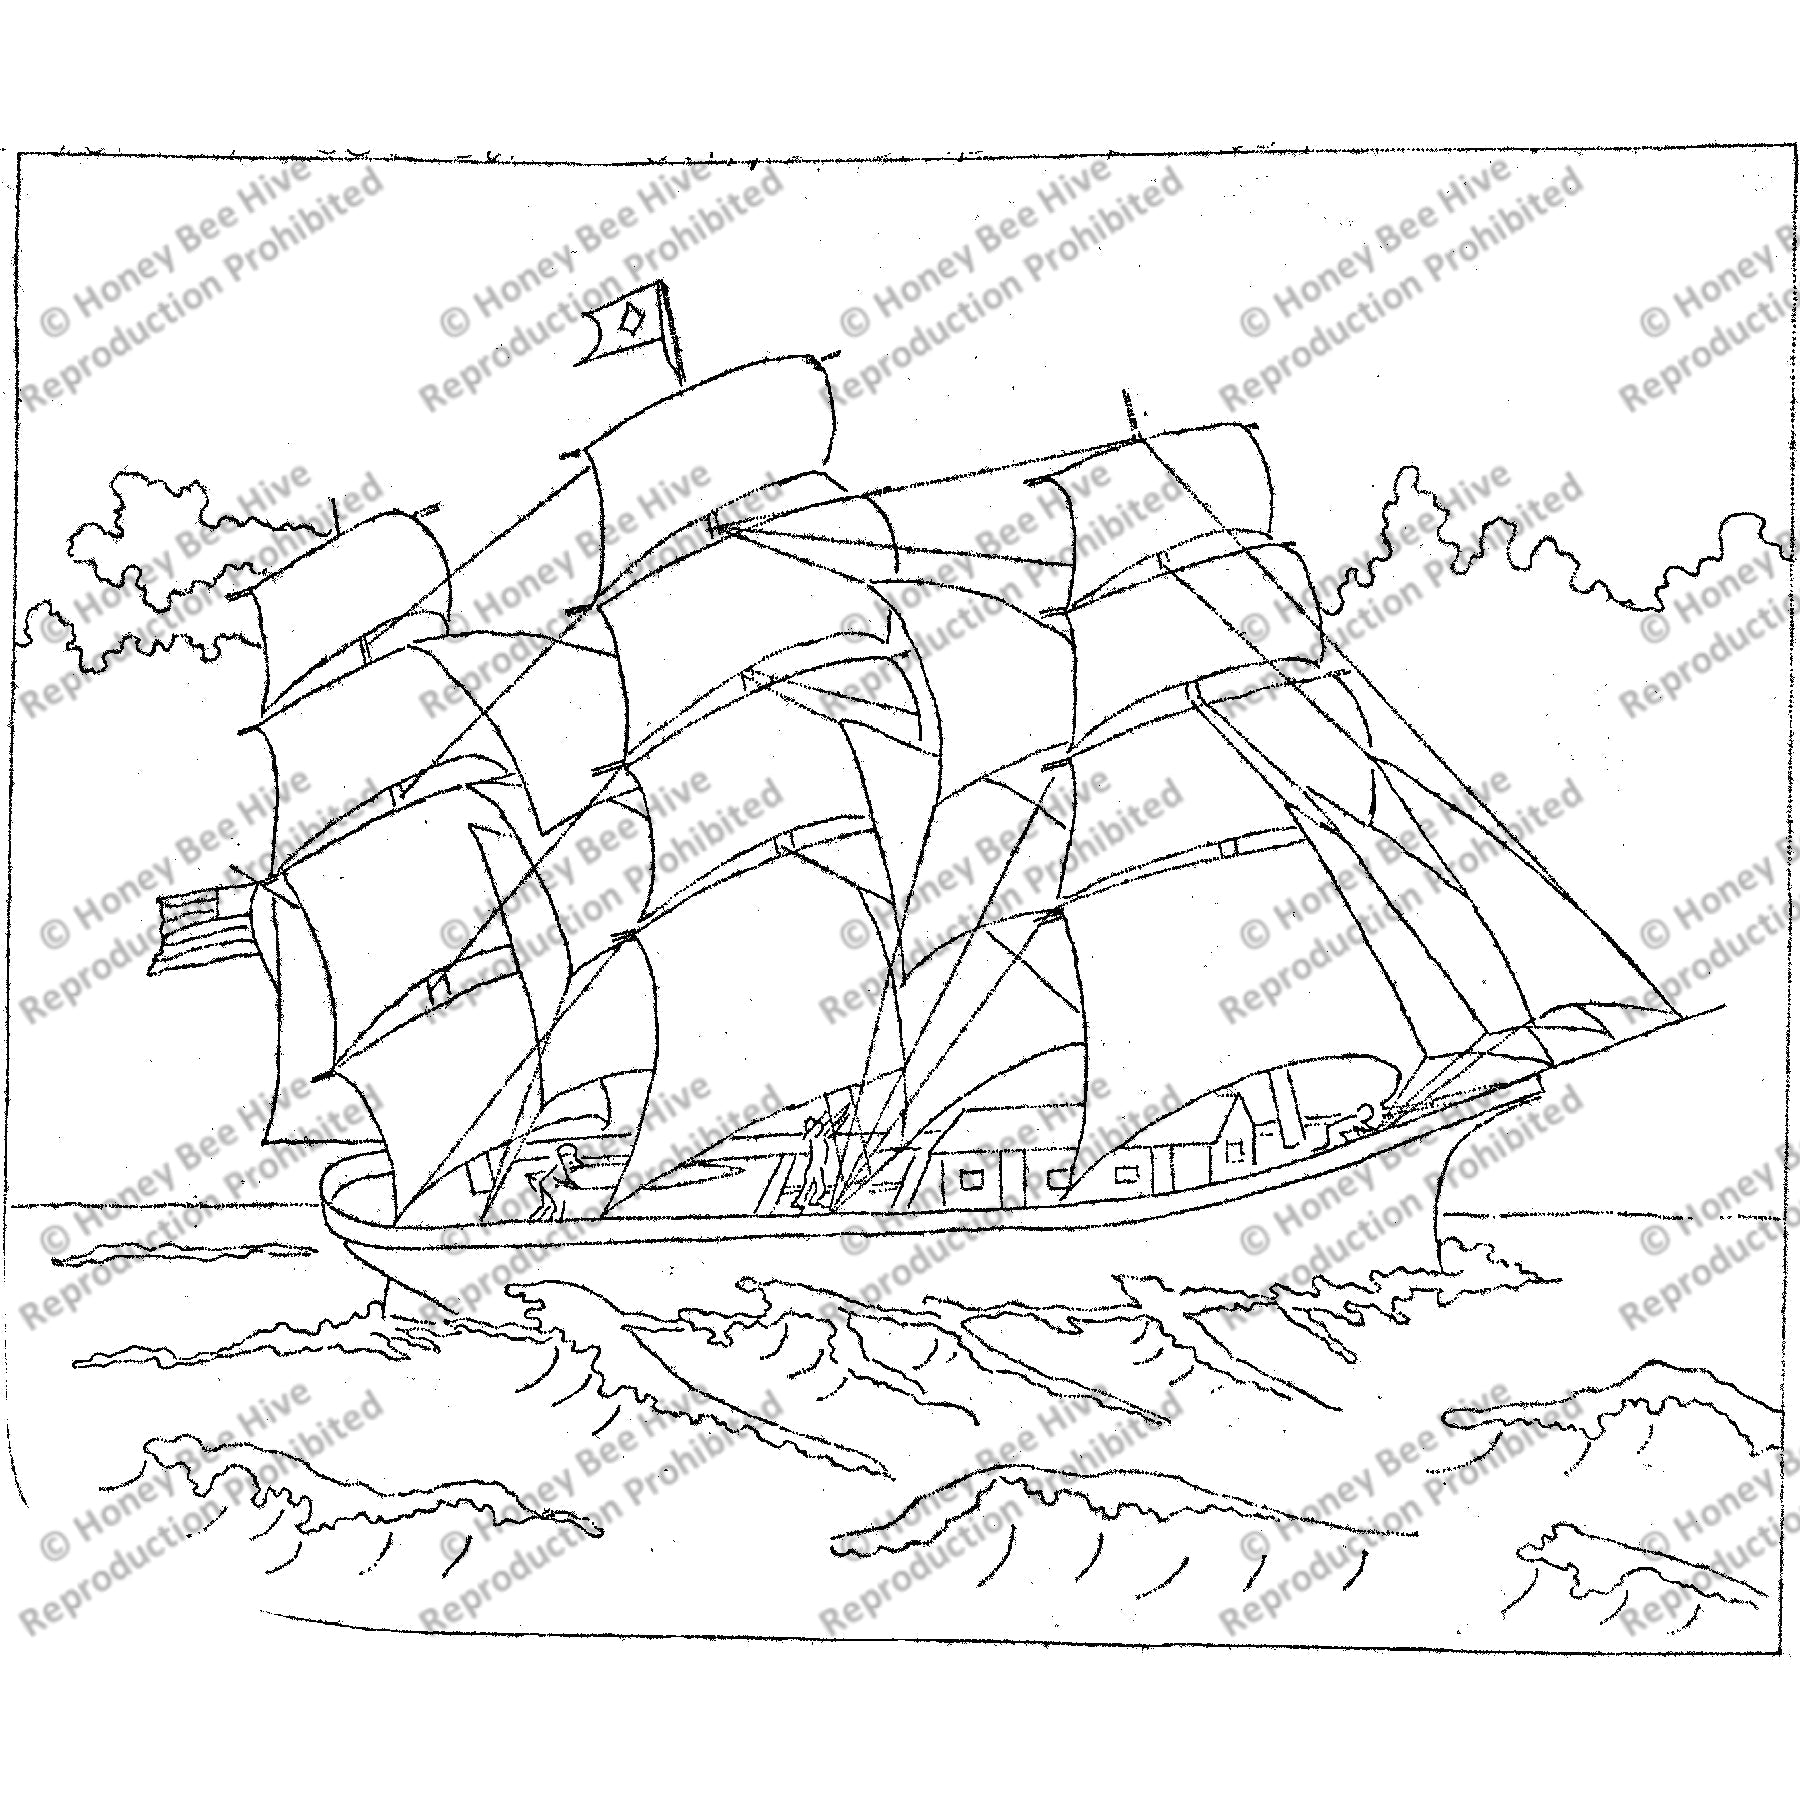 Three Brothers Clipper Ship, rug hooking pattern